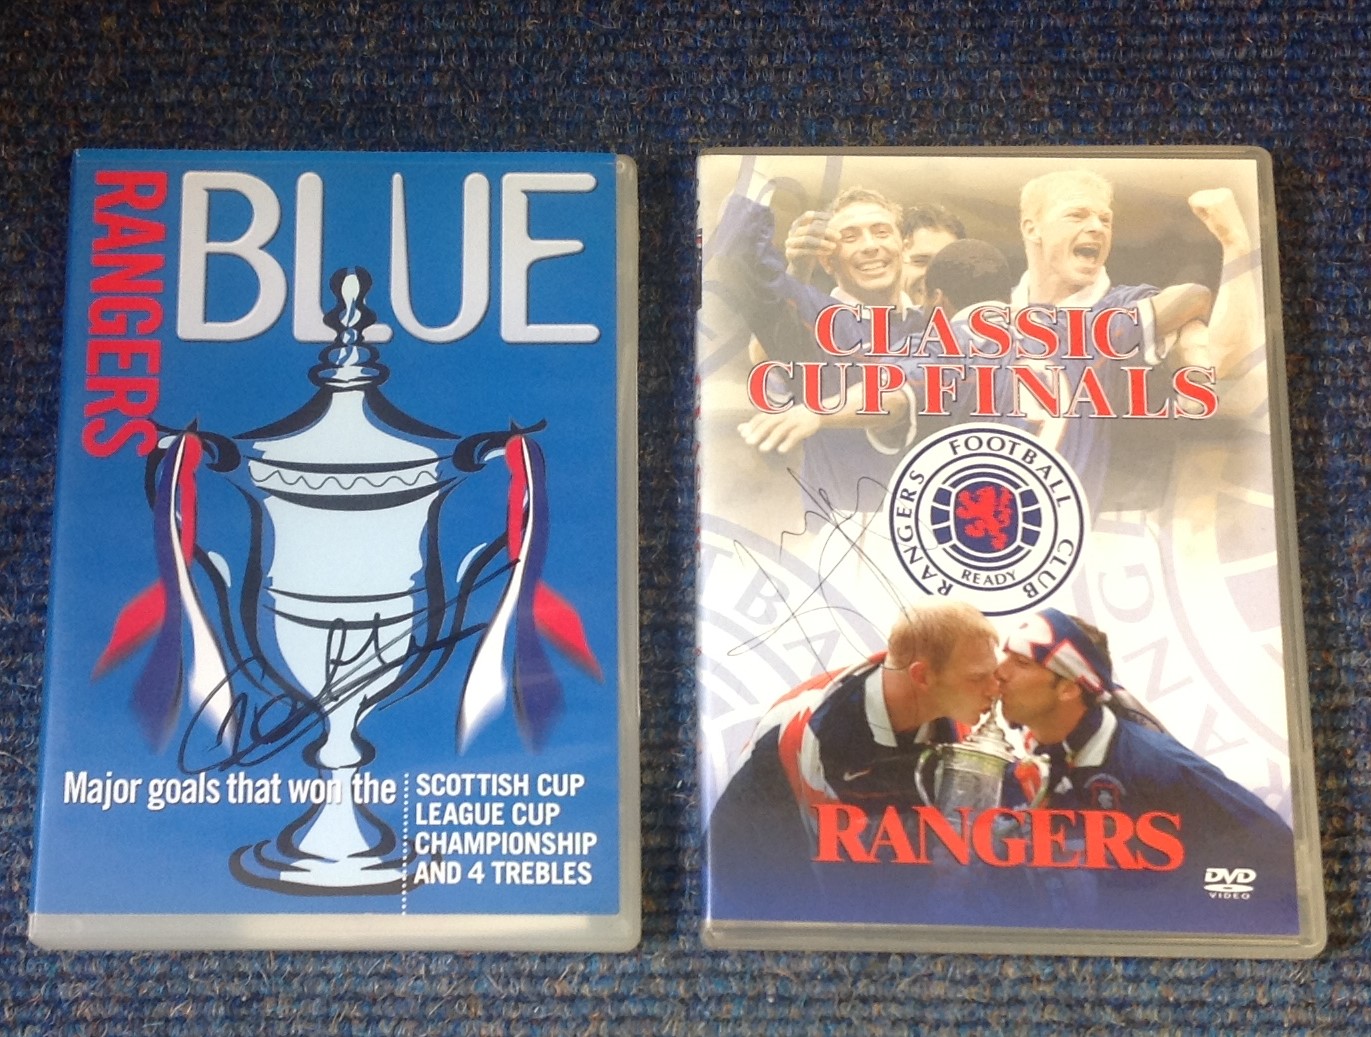 Rangers FC 2 DVD's signed collection. 1 signed by George Albertz the other unidentified. Good